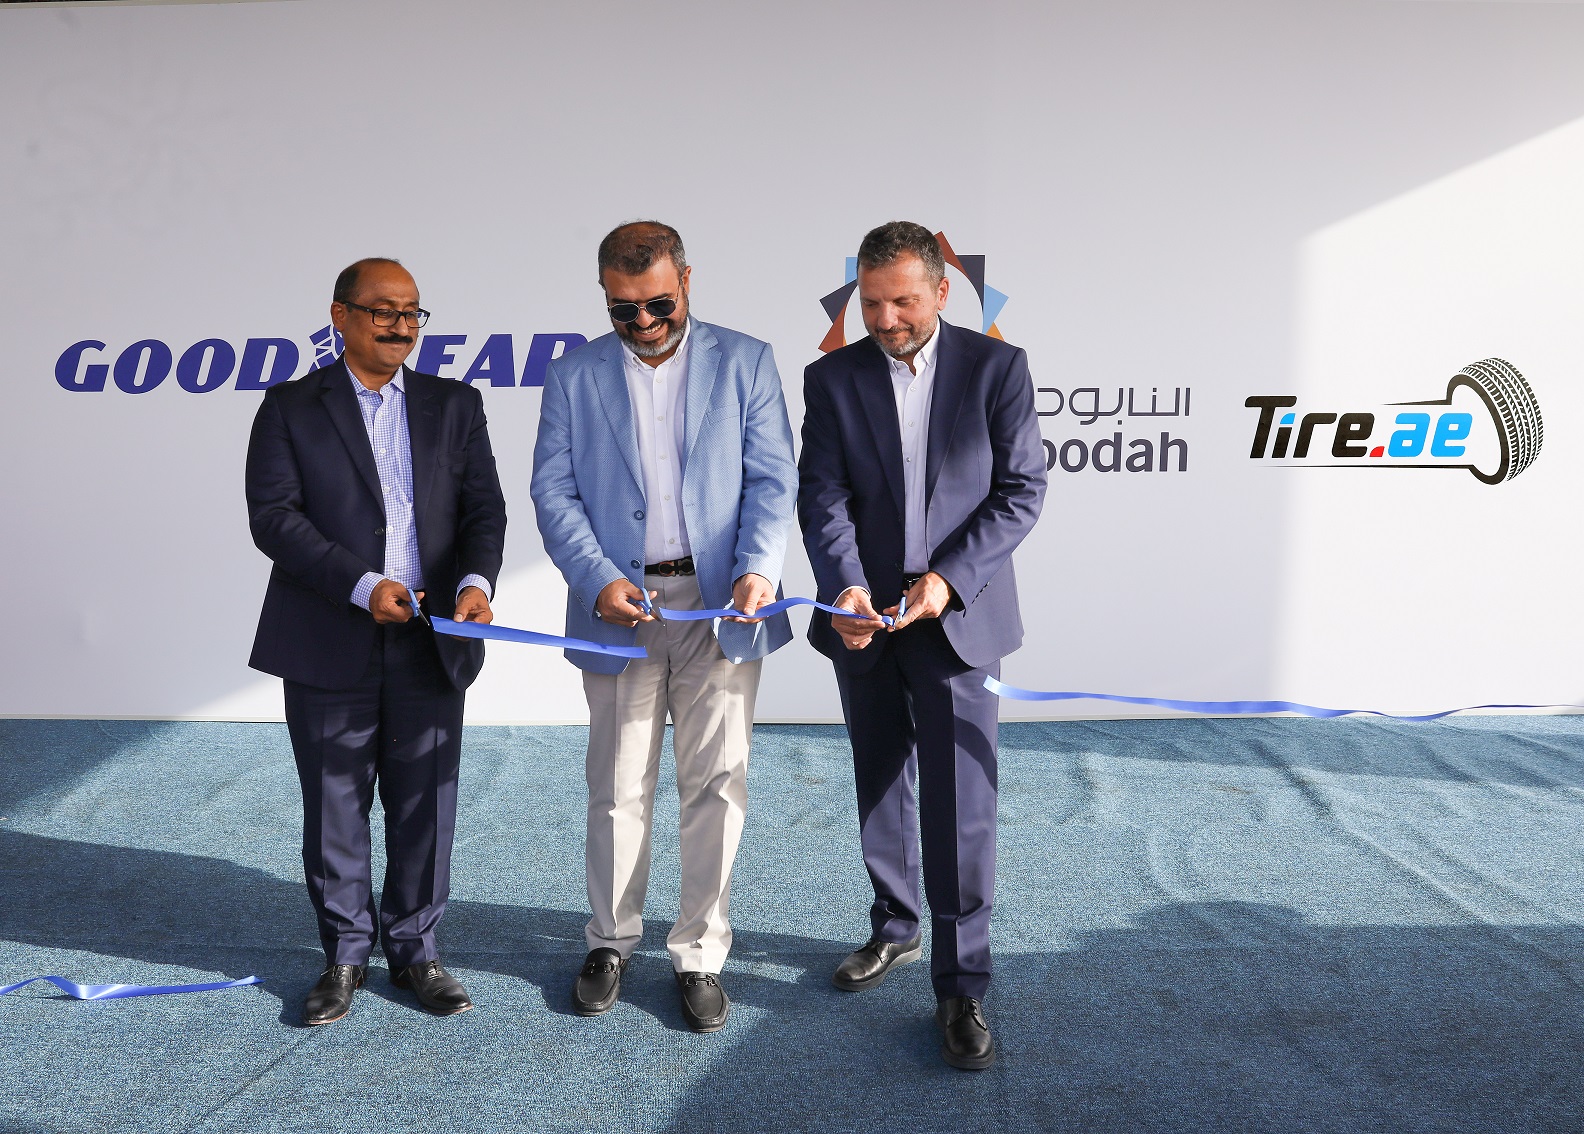 Goodyear expands UAE footprint with the opening of dedicated tire retail center in Abu Dhabi